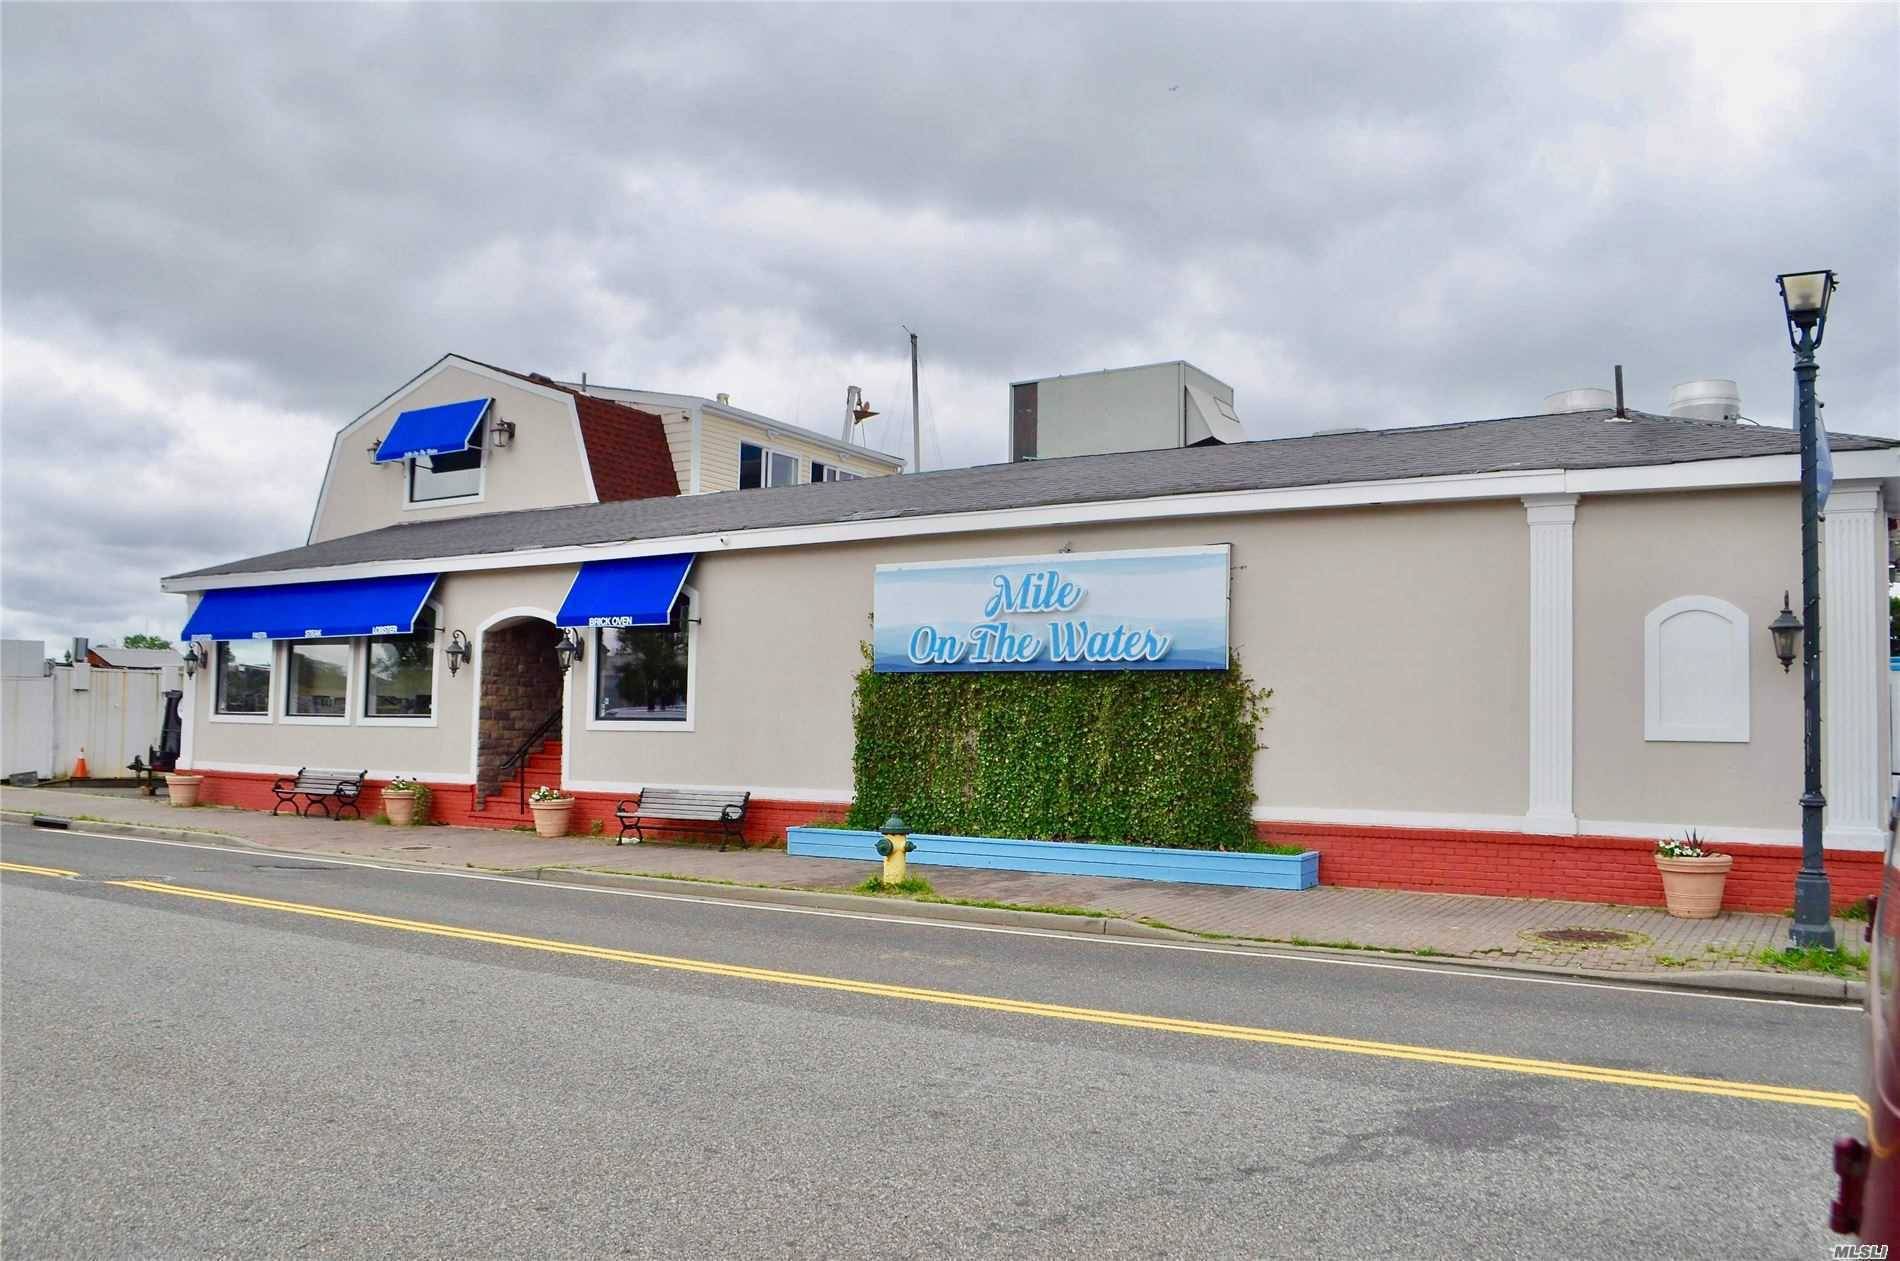 A must see Renovated, fully equipped and fully established restaurant amp ; property on the famous Nautical Mile in Freeport.